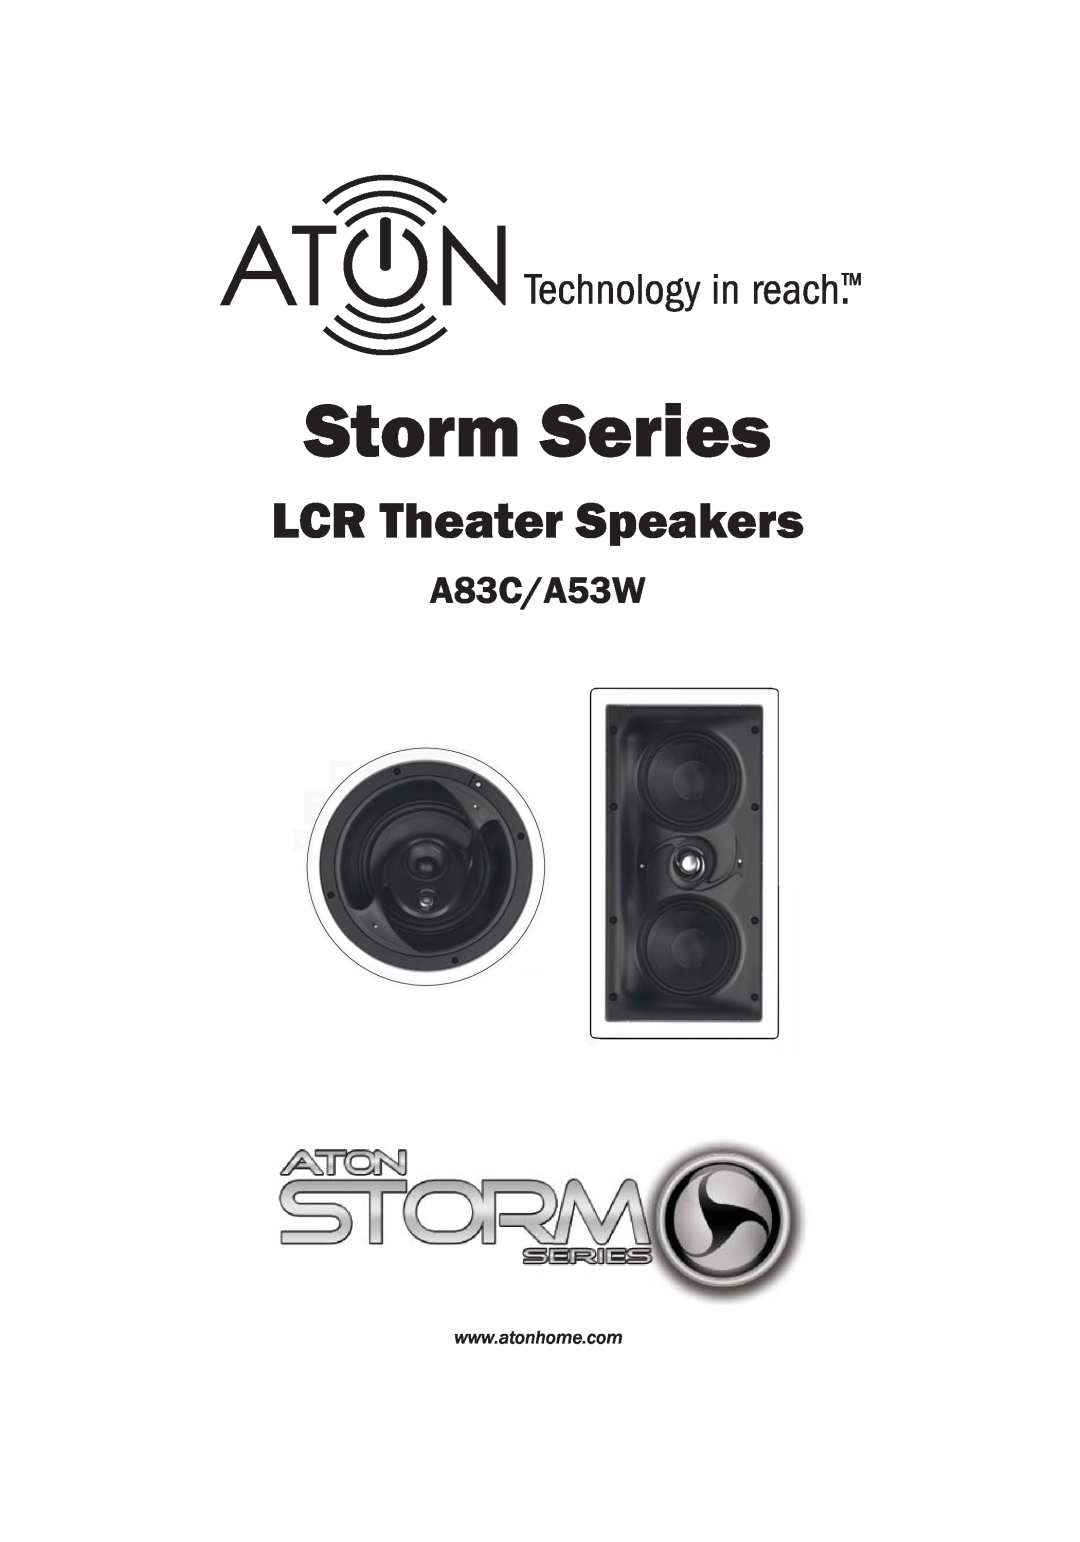 ATON warranty Ideal For Whole-Houseaudio Applications, Heard, Not Seen, Model, Lcr Theater Speakers, A 8 3 C A53W, A83C 